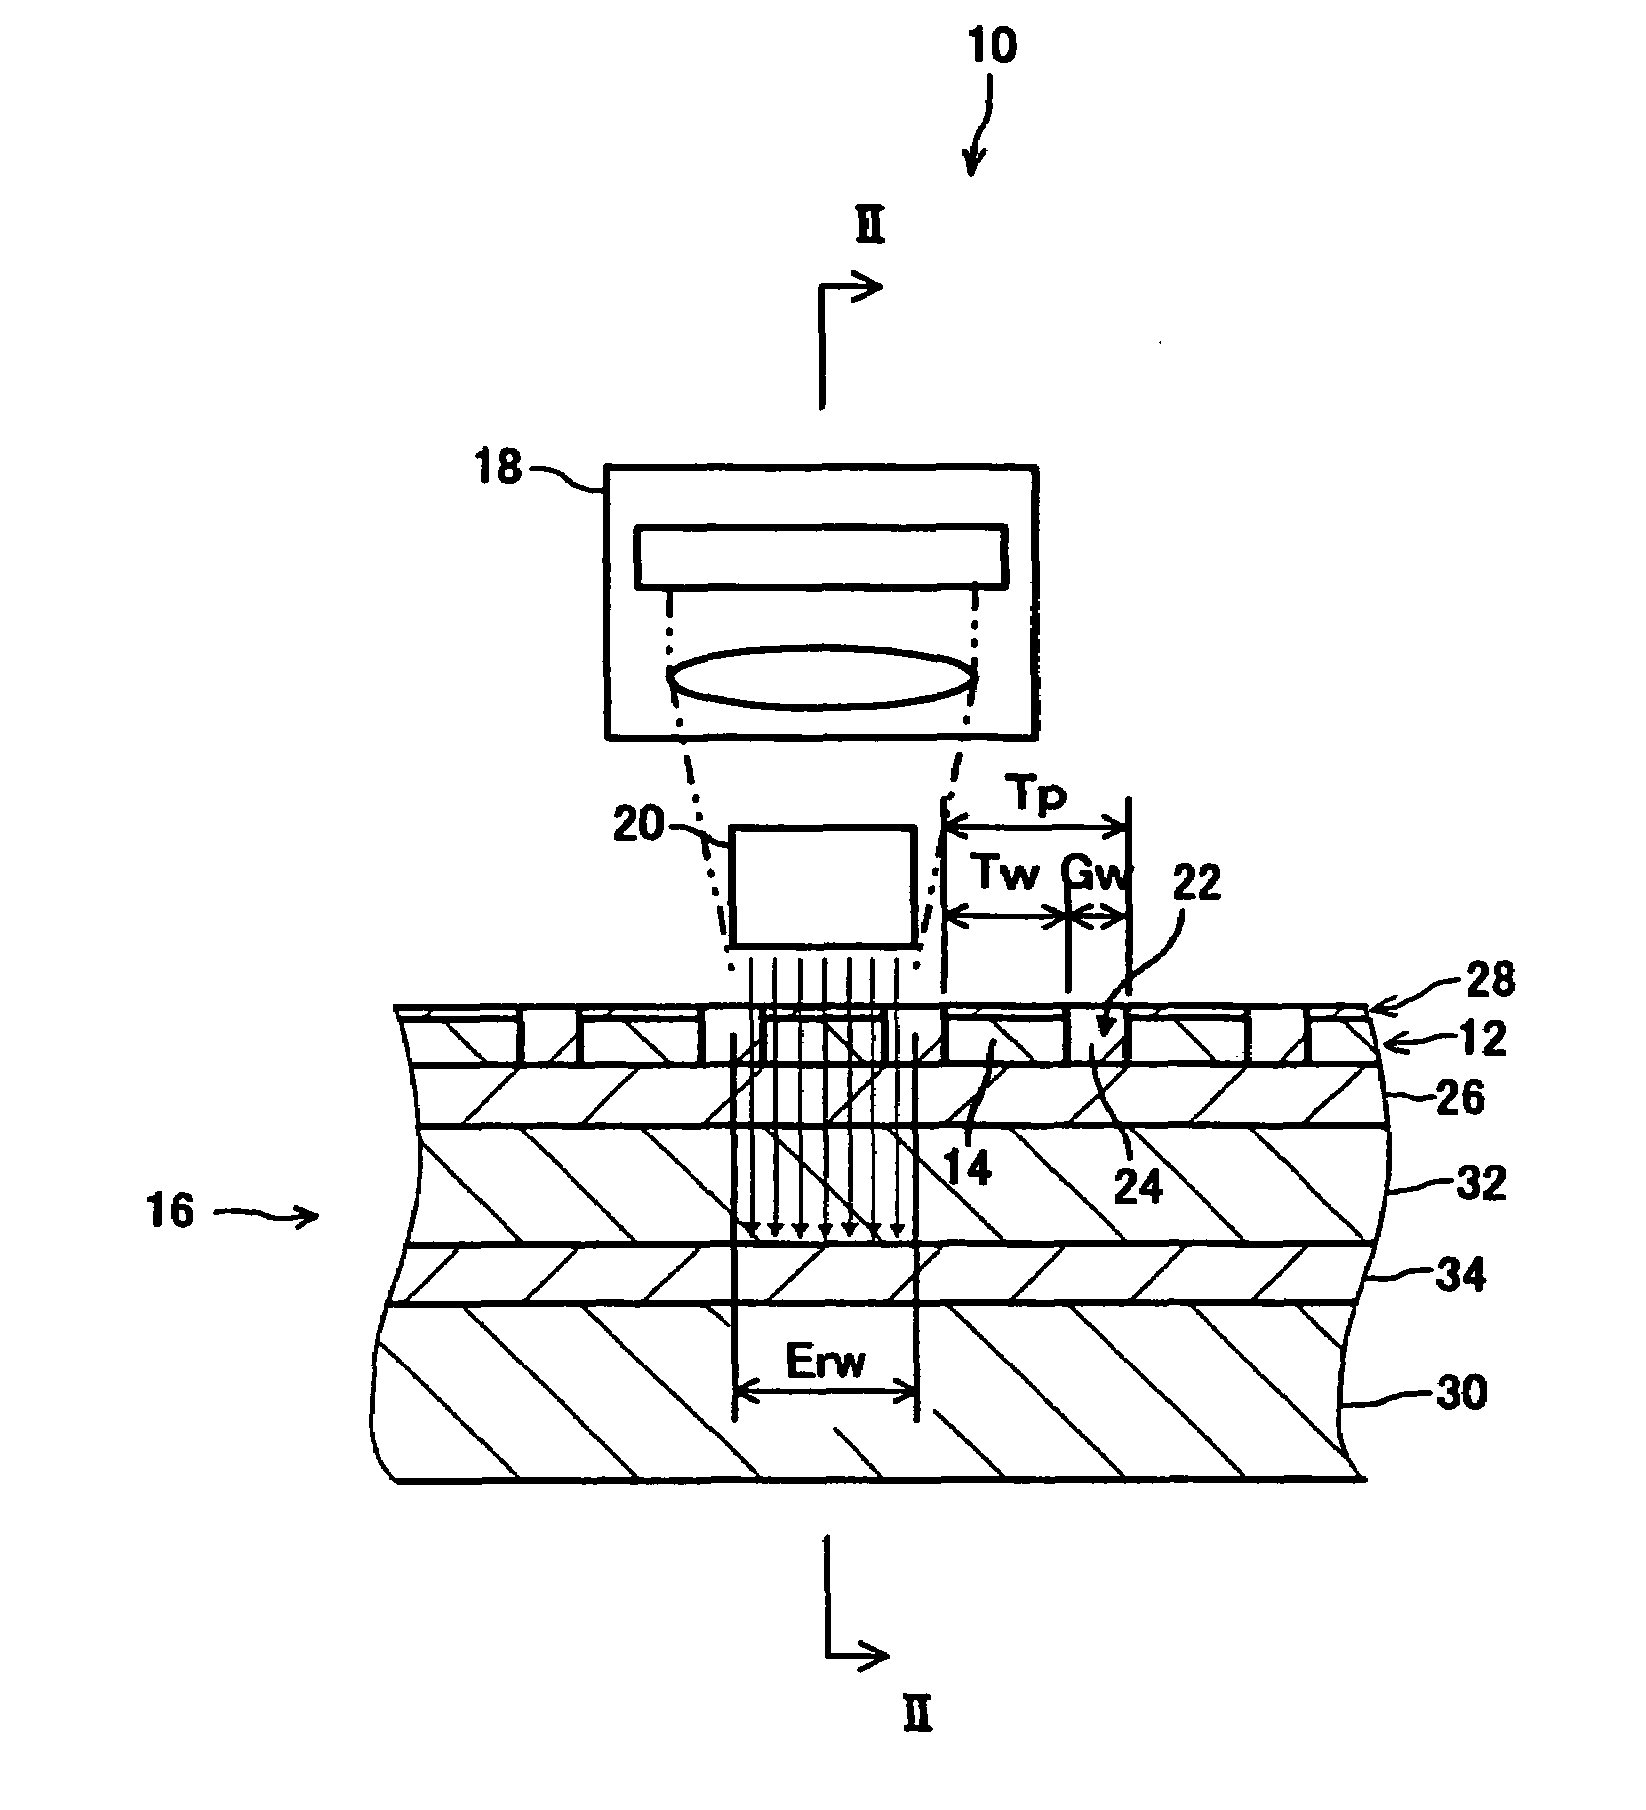 Magnetic recording and reproducing device and magnetic recording medium